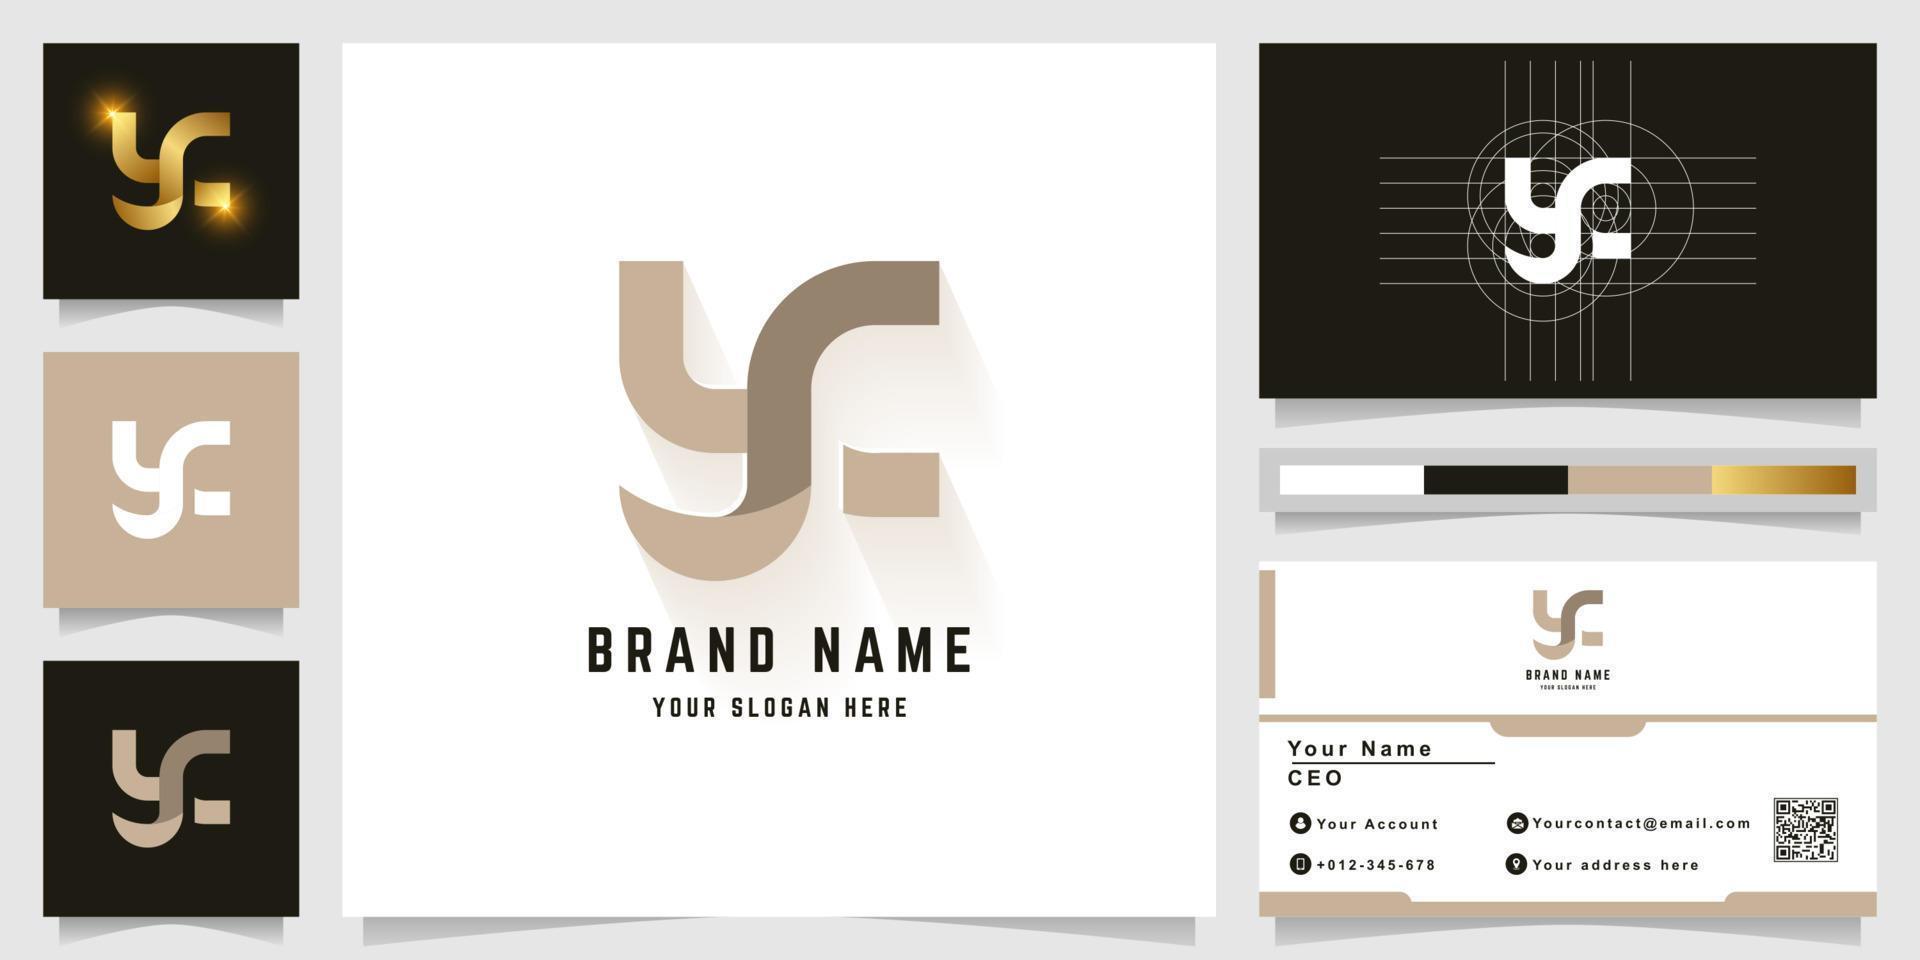 Letter yc or ysc monogram logo with business card design vector